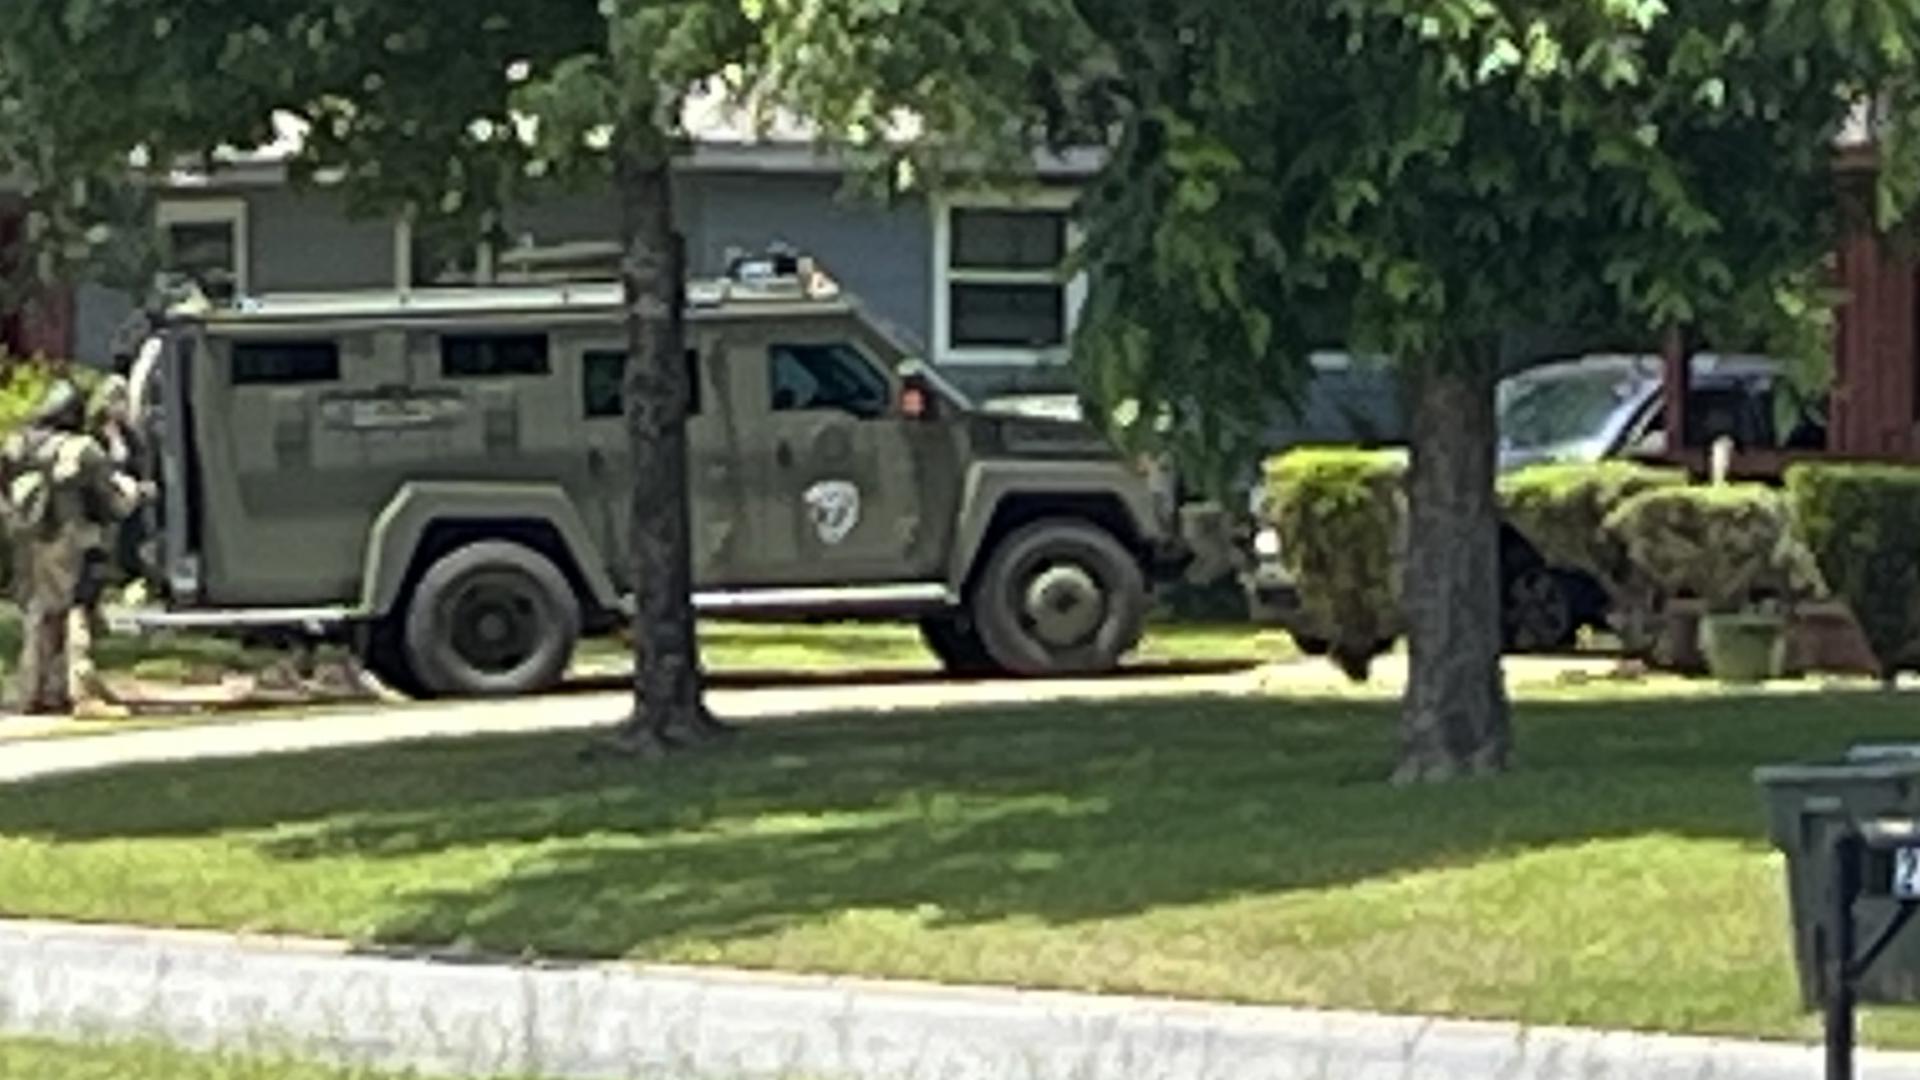 The SWAT team is on the scene